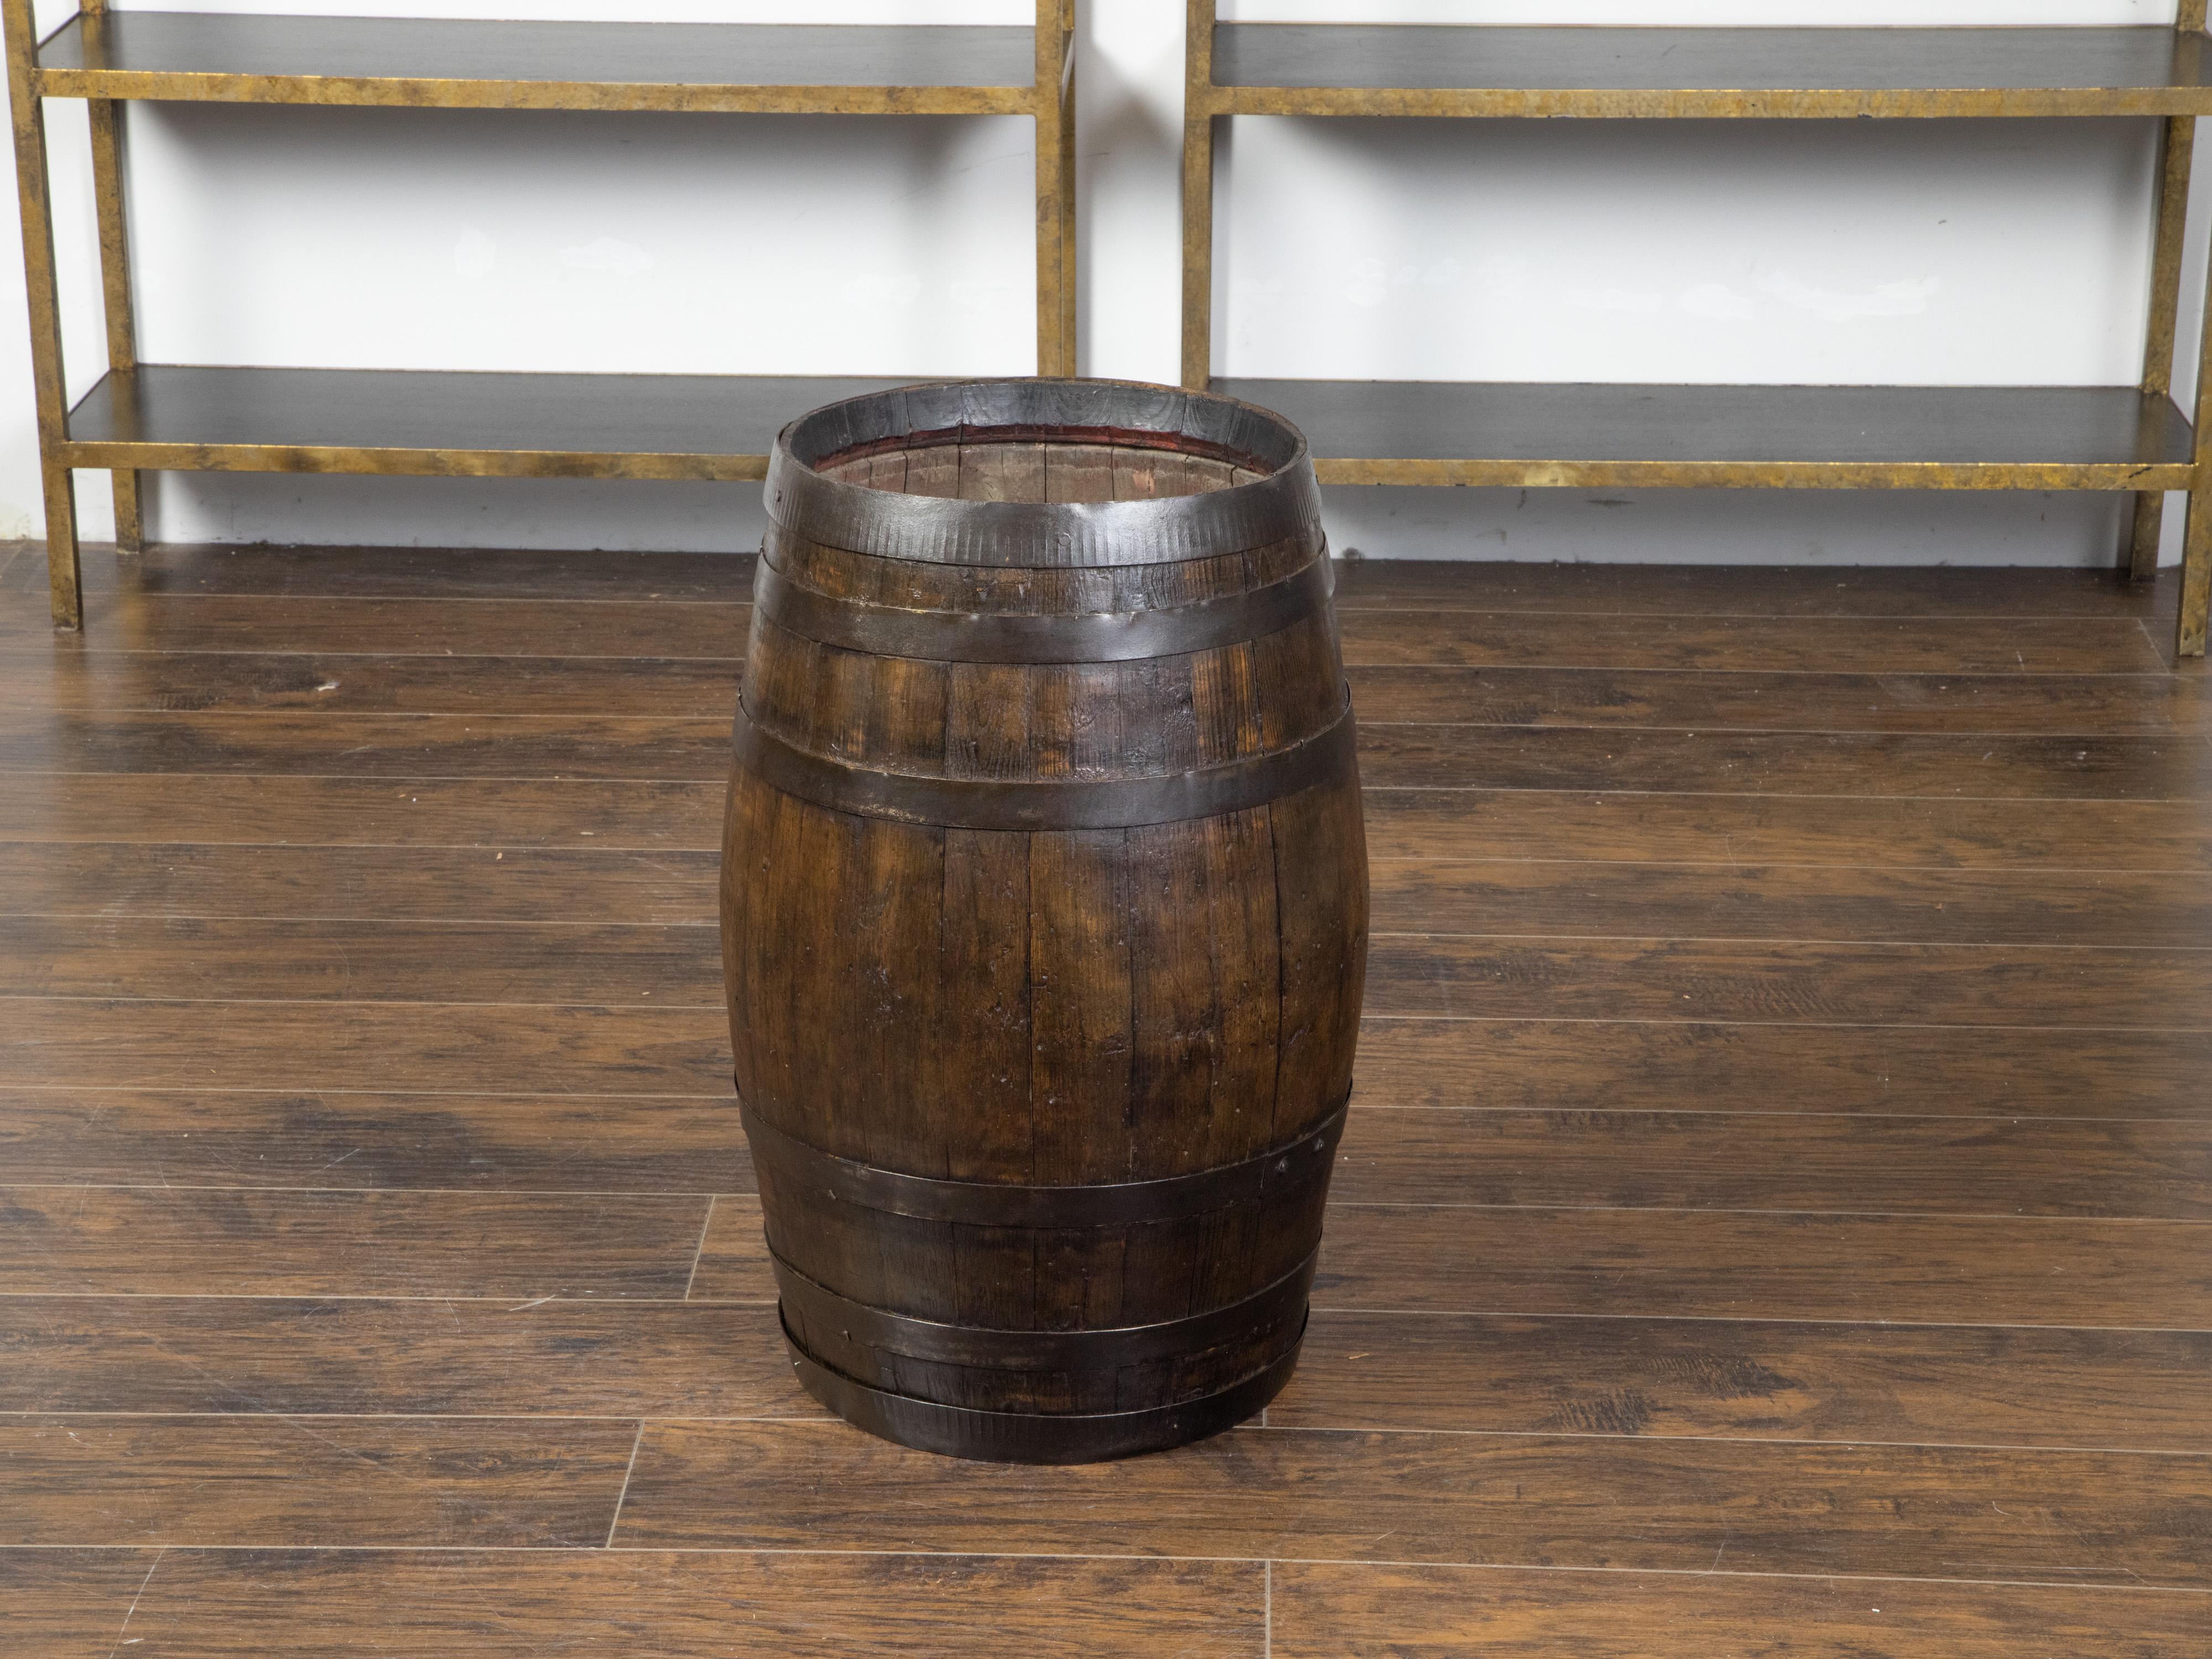 An English rustic oak barrel from the late 19th century, with iron braces. Created in England during the last decade of the 19th century, this barrel features a sturdy oak body made of vertical slats strengthened by the horizontal iron braces that